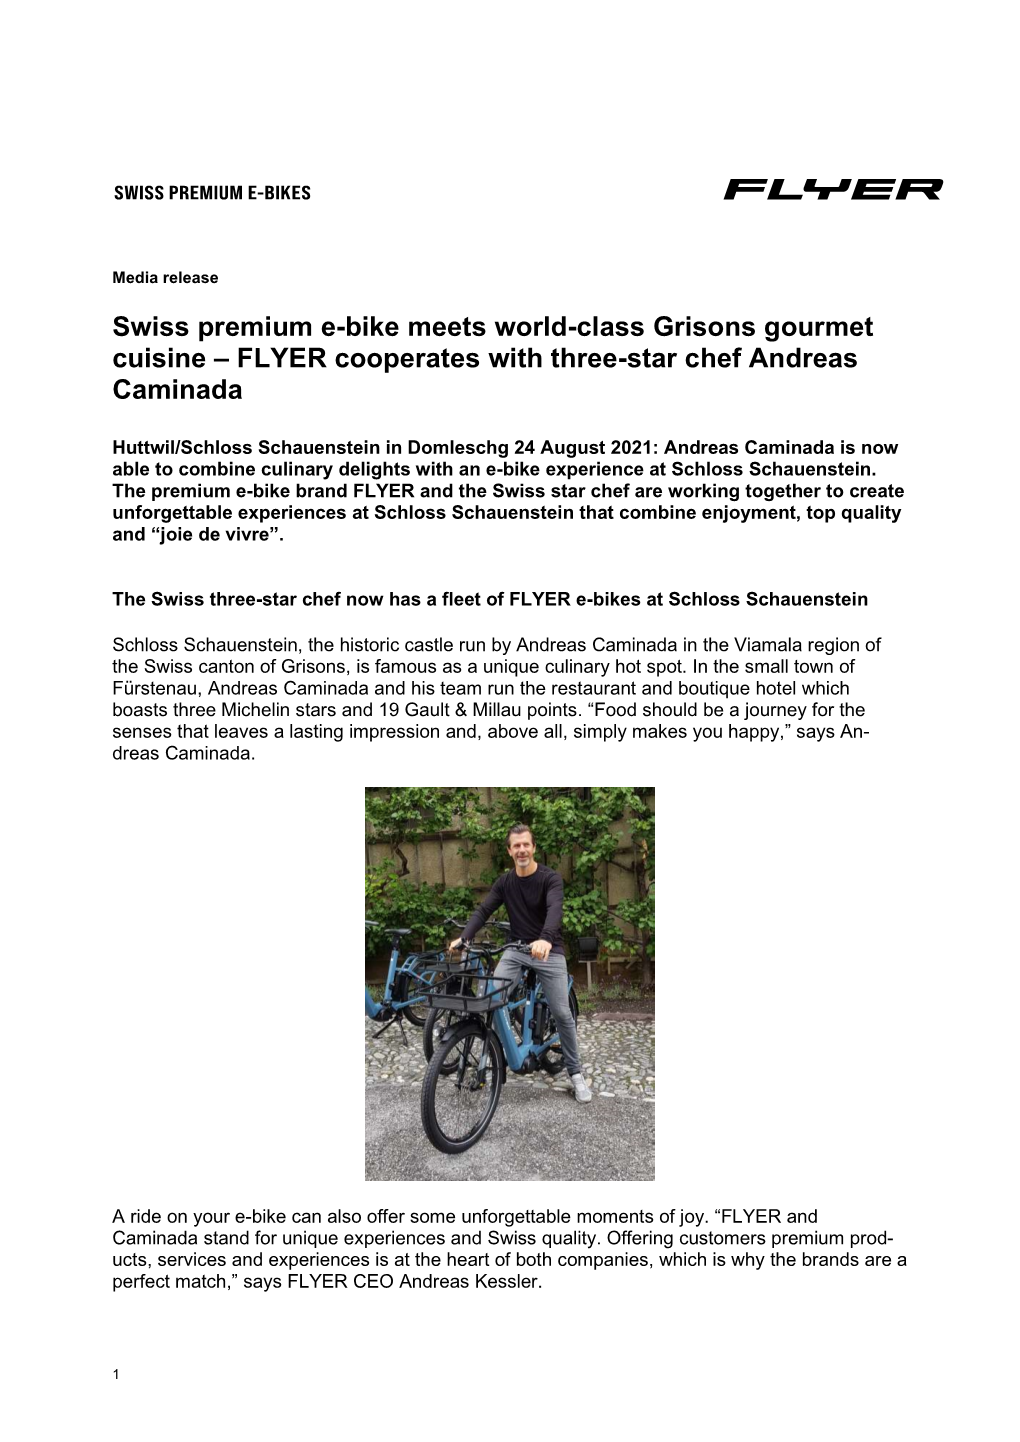 Swiss Premium E-Bike Meets World-Class Grisons Gourmet Cuisine – FLYER Cooperates with Three-Star Chef Andreas Caminada